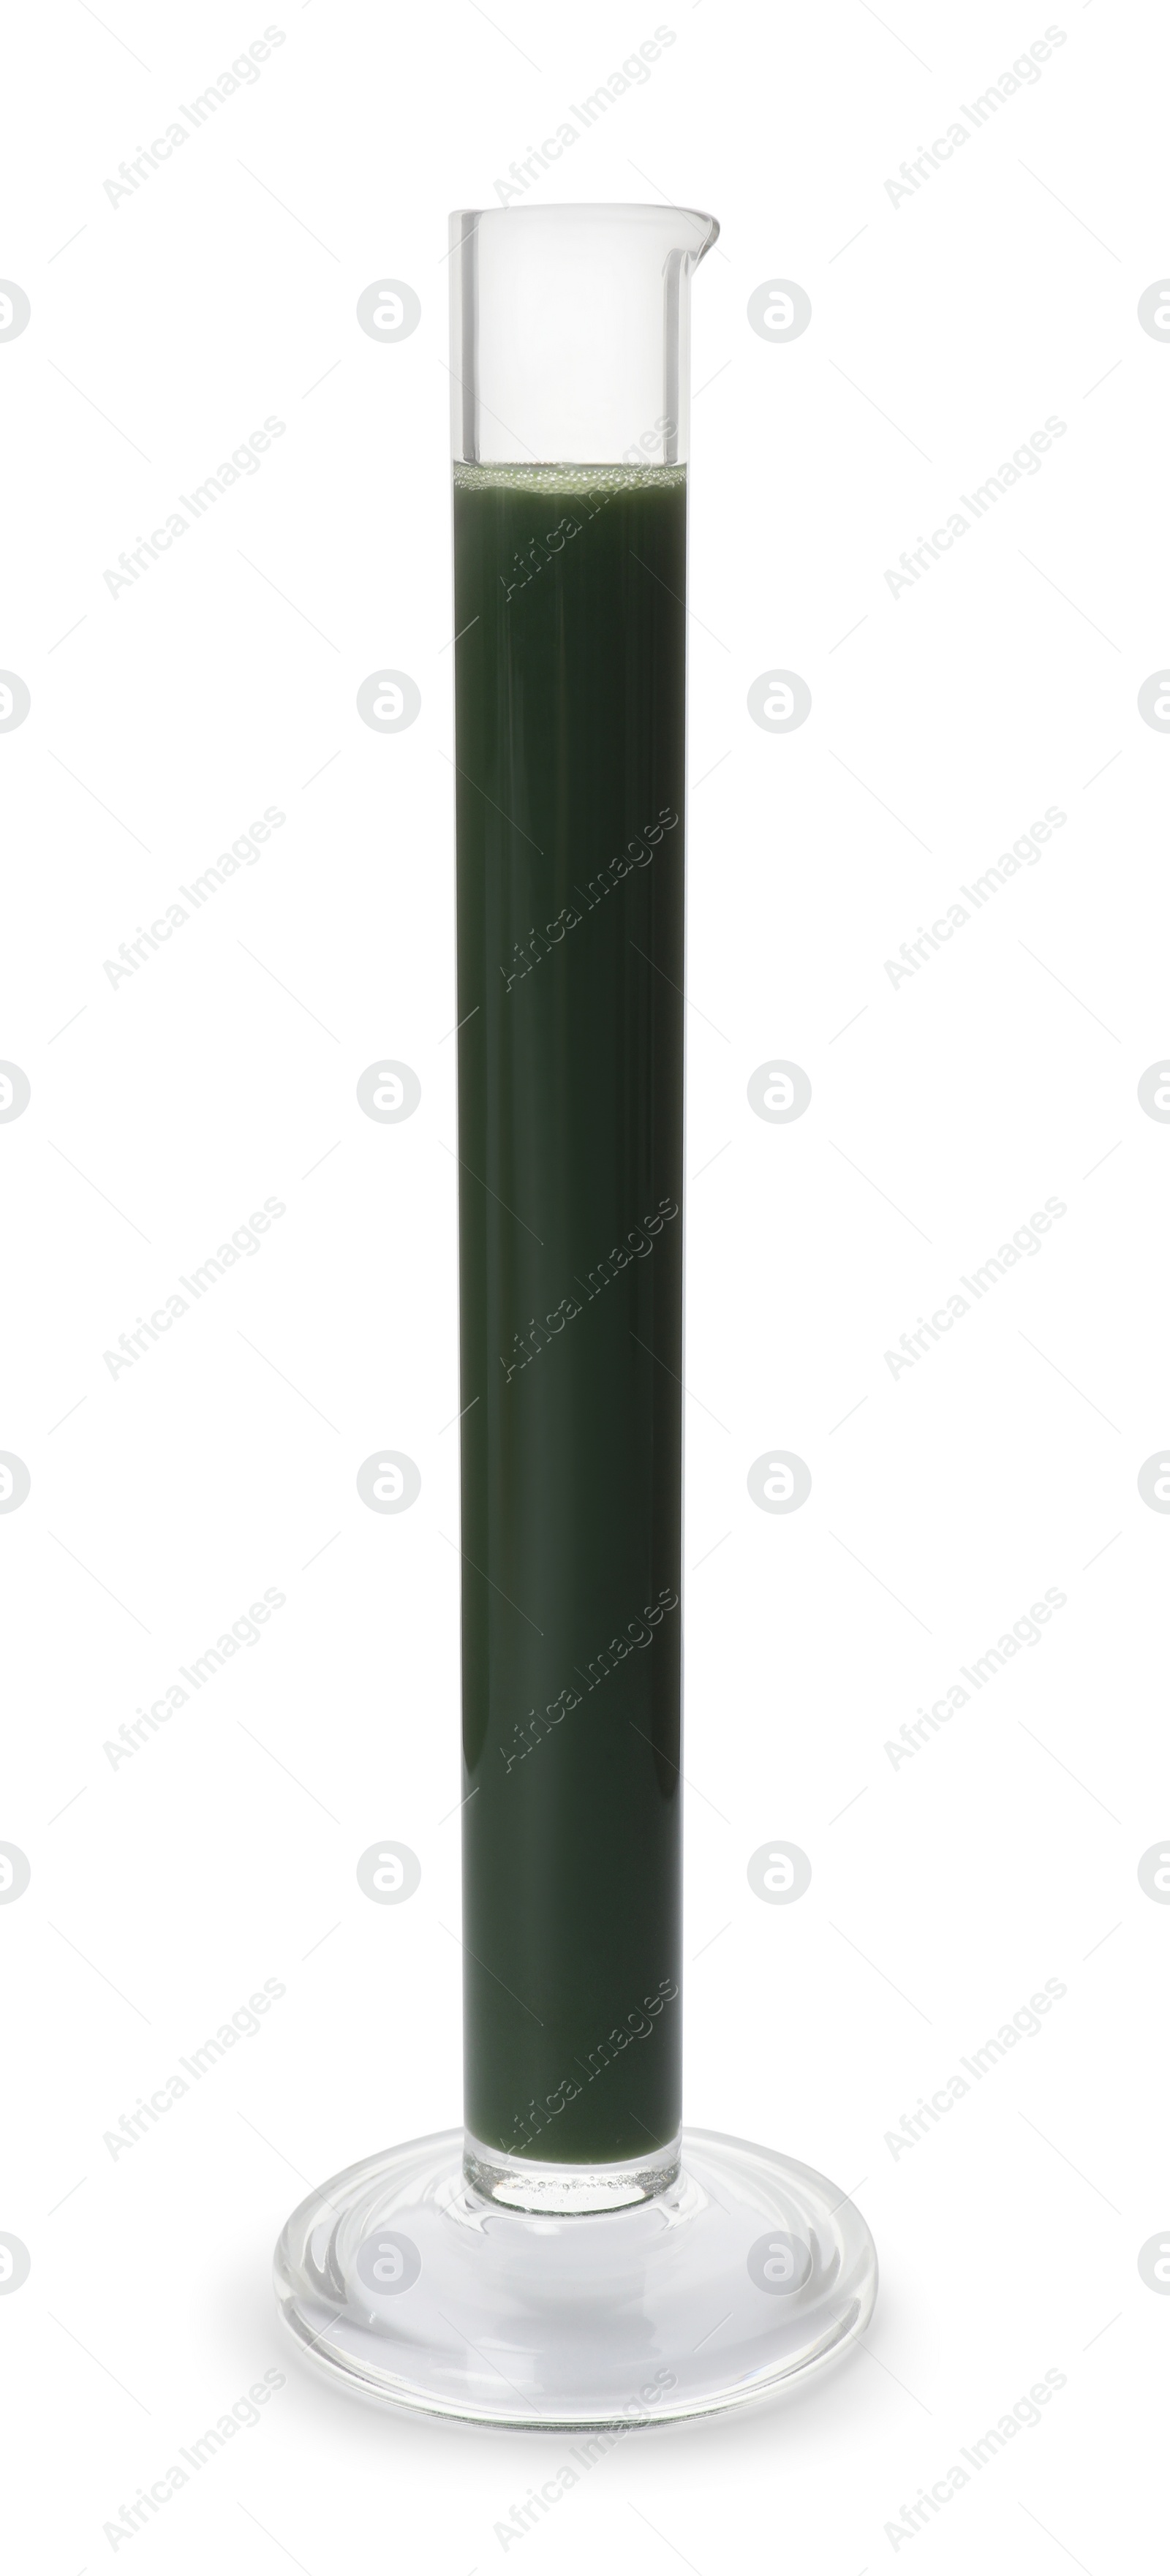 Photo of Test tube with crude oil isolated on white